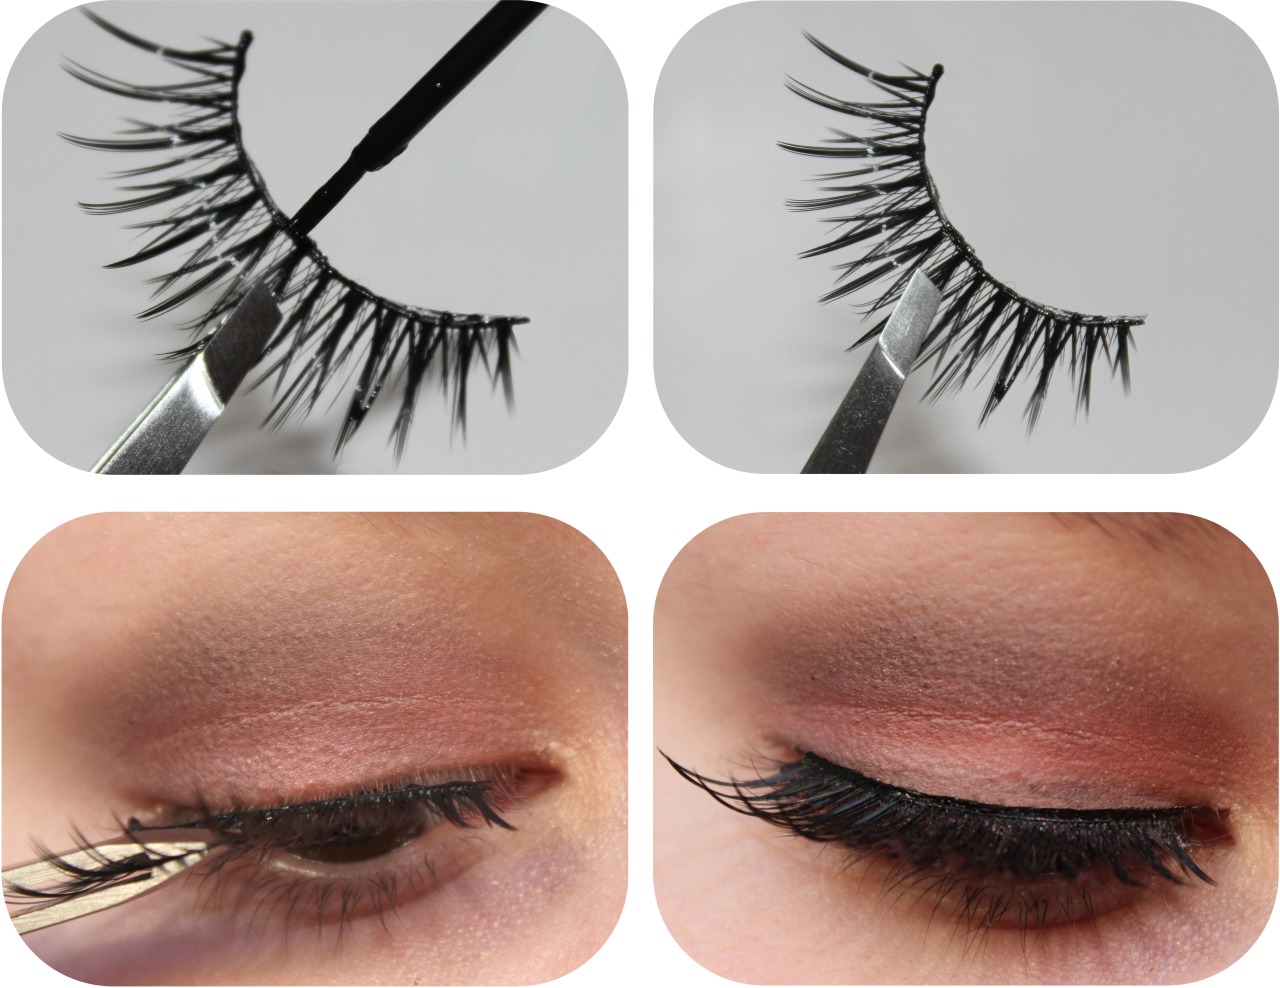 
Paint the Band of Your False Lashes!
False lashes can be tricky thing to apply,  one of my favourite tips for false lash application is to paint the band of false lashes to help disguise the band and help them blend in easier
Step 1. &#8220;Paint&#8221; the band of your false lashes with a &#8220;pot&#8221; liquid liner (not a felt tip or gel liner)
Step 2. Allow the liquid liner to dry, apply lash glue and allow it to become tacky
Step 3. Gently slide the false lashes onto the lashline
Step 4. Finish by applying liquid liner over the false lashes to help them blend in seamlessly
@makeuptipsblog Instagram:  Twitter | Pinterest | Newsletter | Youtube
*Please view Makeup Tips disclosure policies regarding information and products mentioned on this blog.